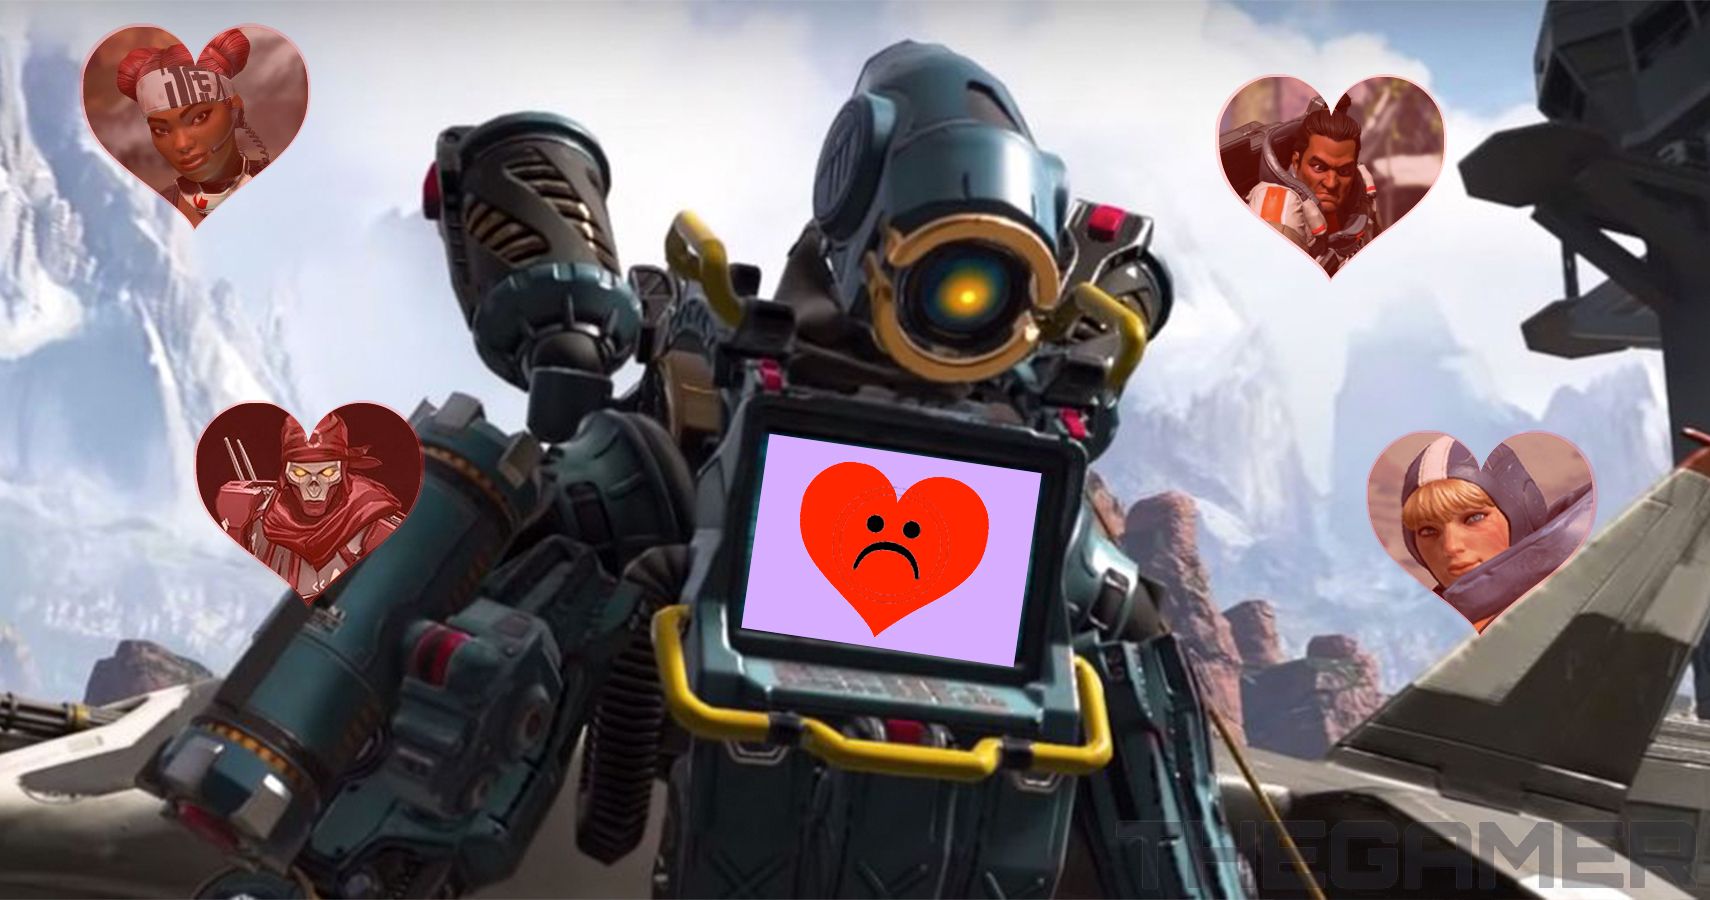 A sad Pathfinder dreams about finding a Duos Mode partner in Apex Legends.